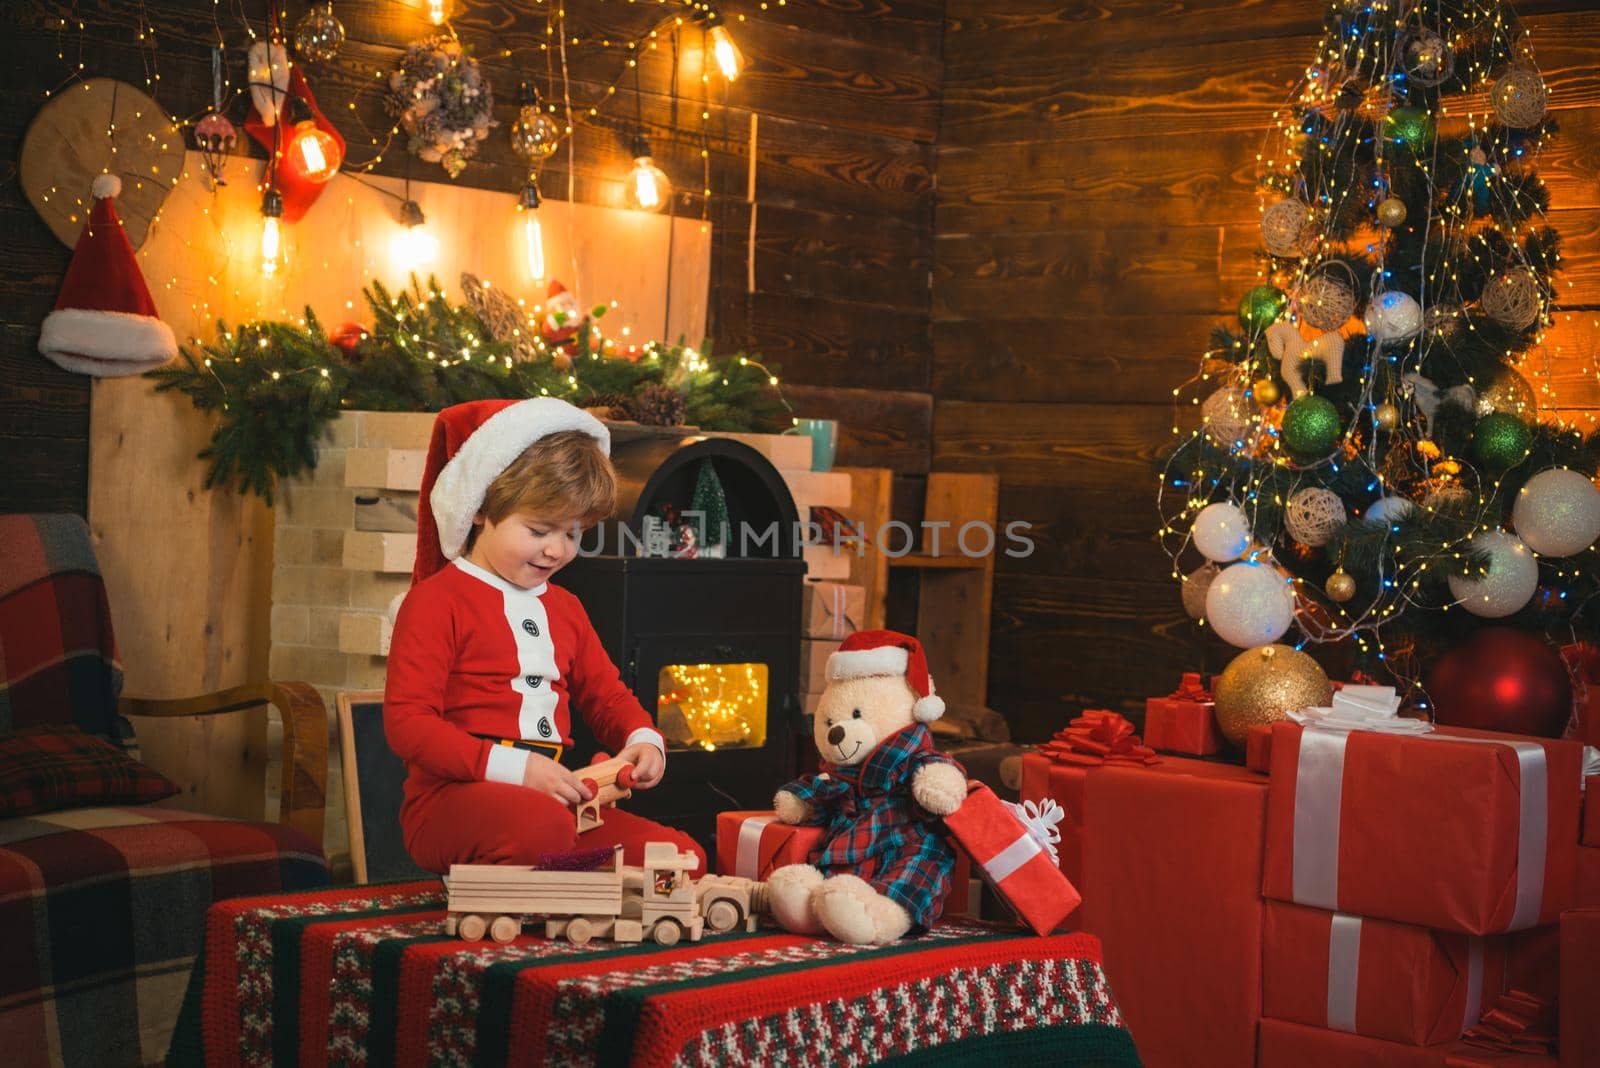 New year countdown. Merry and bright christmas. Lovely baby enjoy christmas. Family holiday. Childhood memories. Santa boy little child celebrate christmas at home. Boy child play near christmas tree.